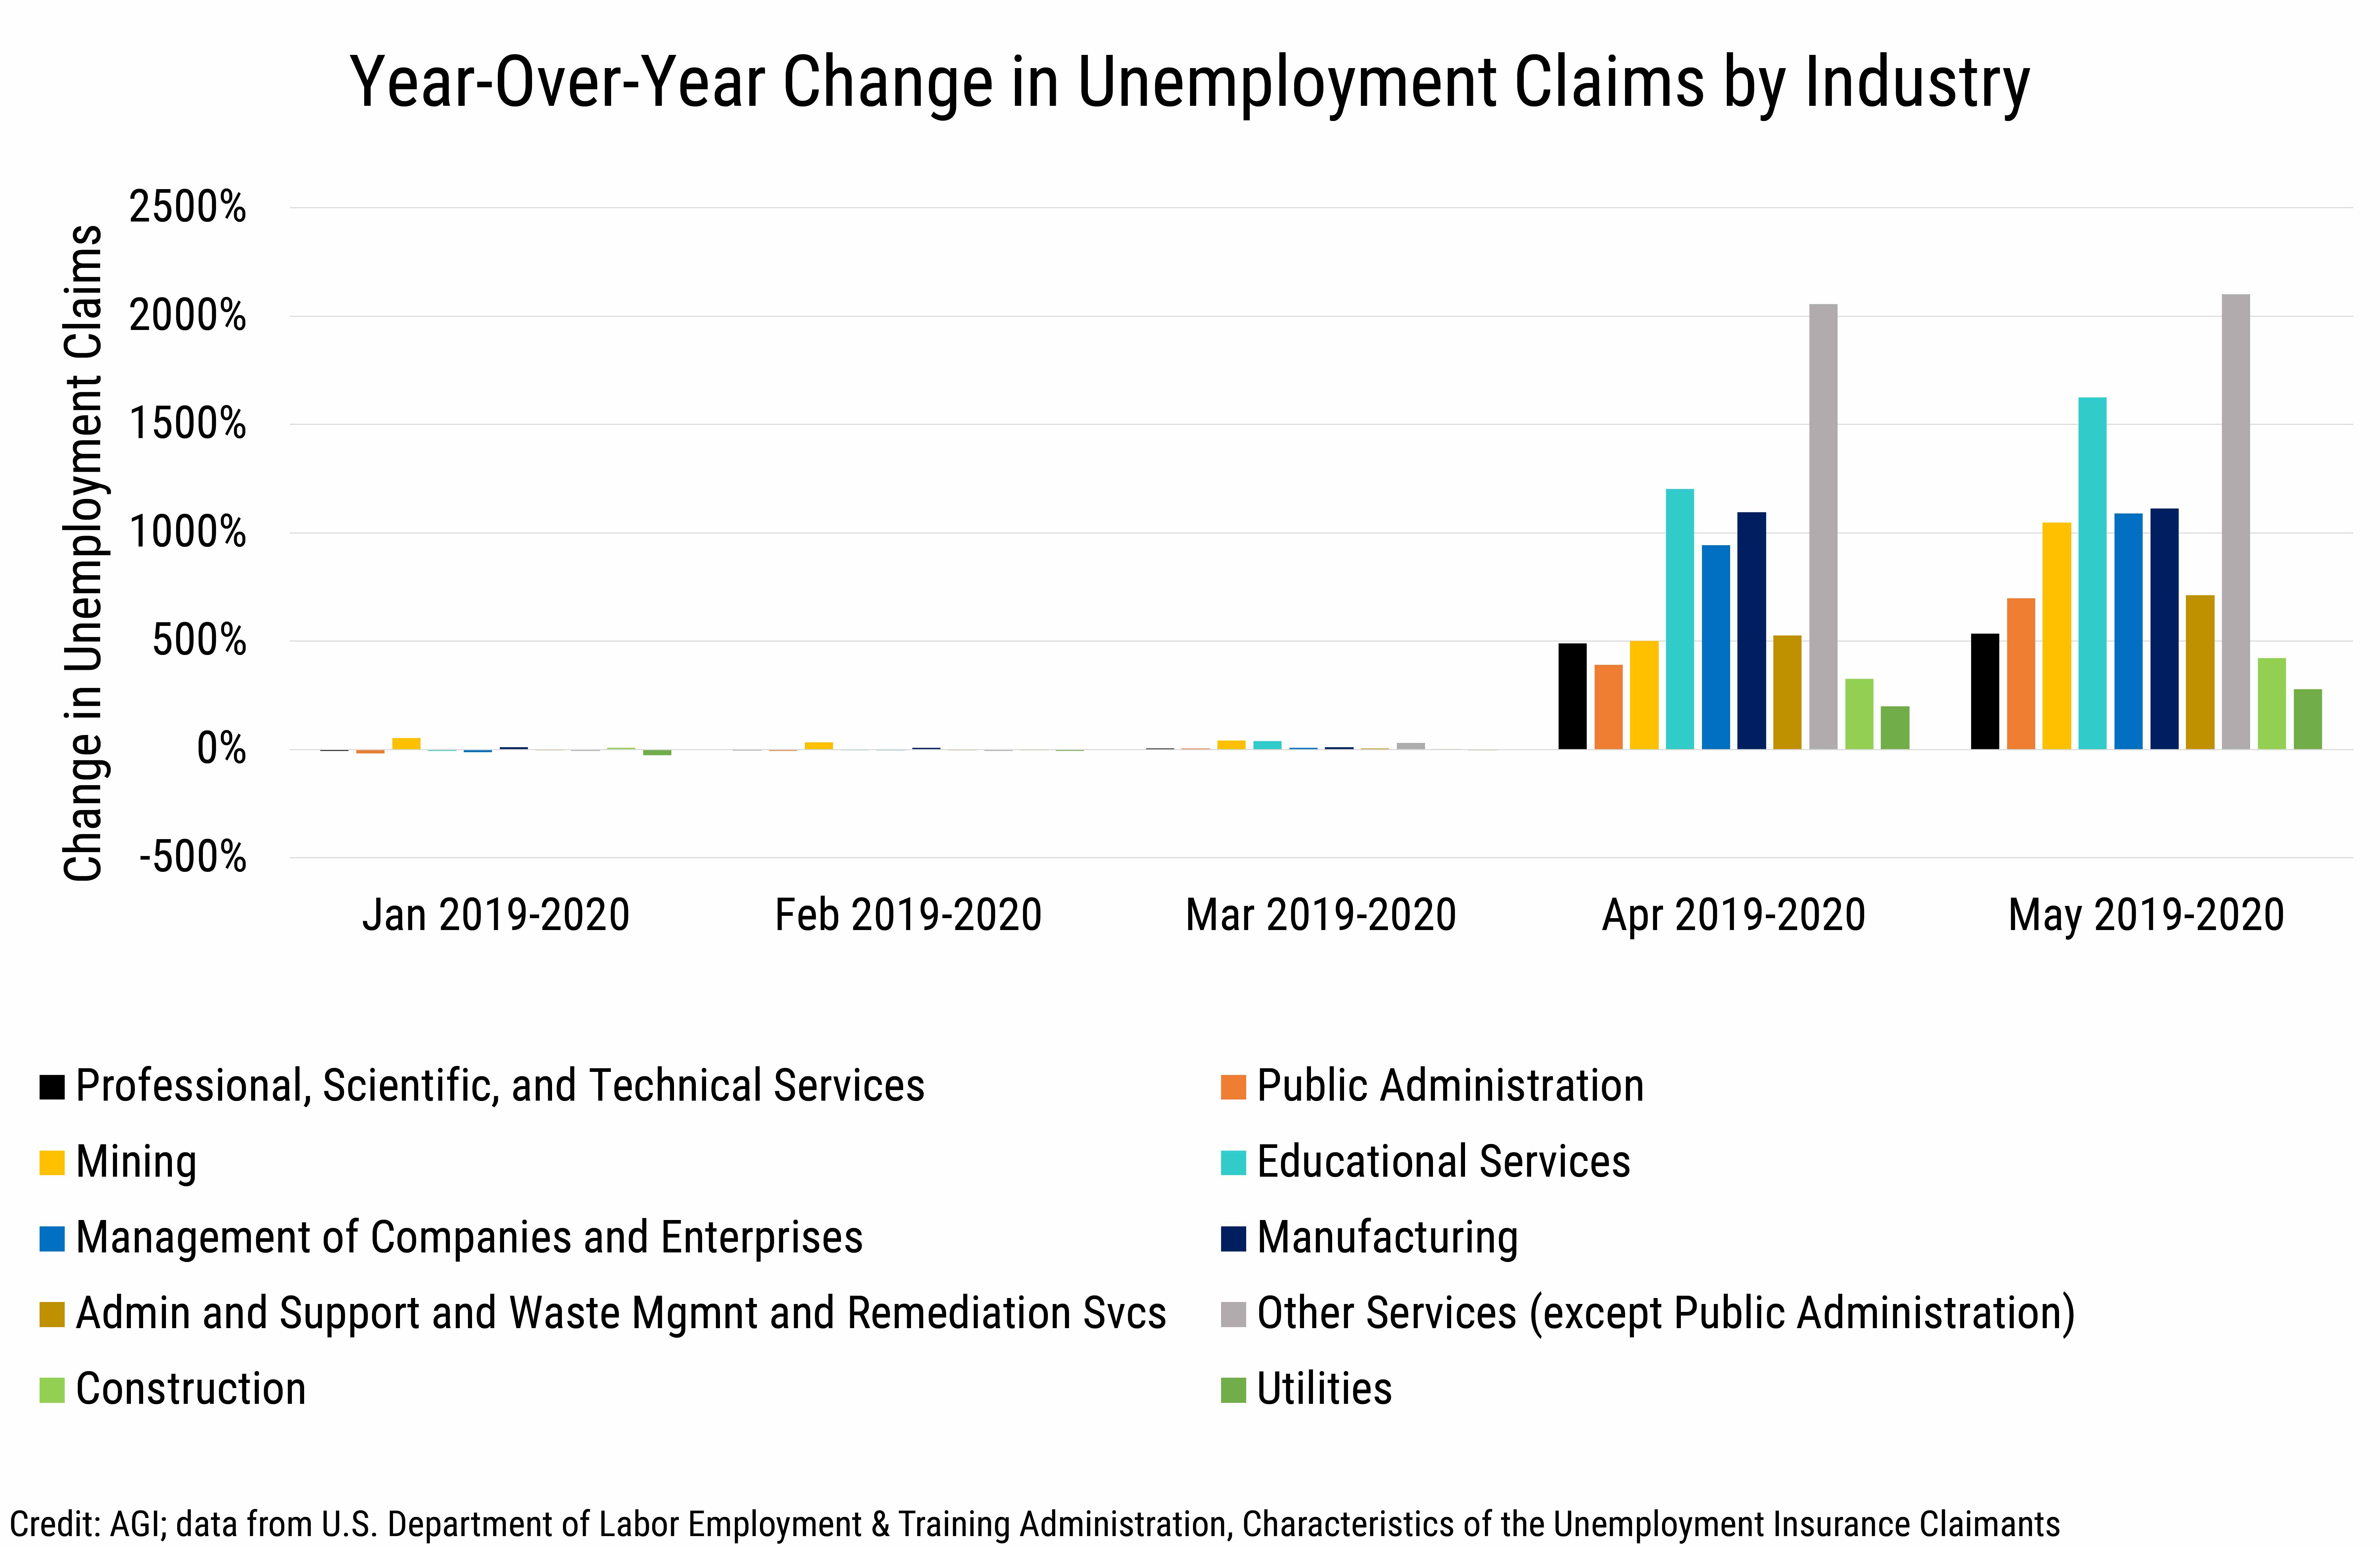 Data Brief 2020-013_rev20201119 chart-03: Year-Over-Year Change in Unemployment Claims by Industry (Credit: AGI, data derived from the U.S. DOLETA, Characteristics of the Unemployment Insurance Claimants)